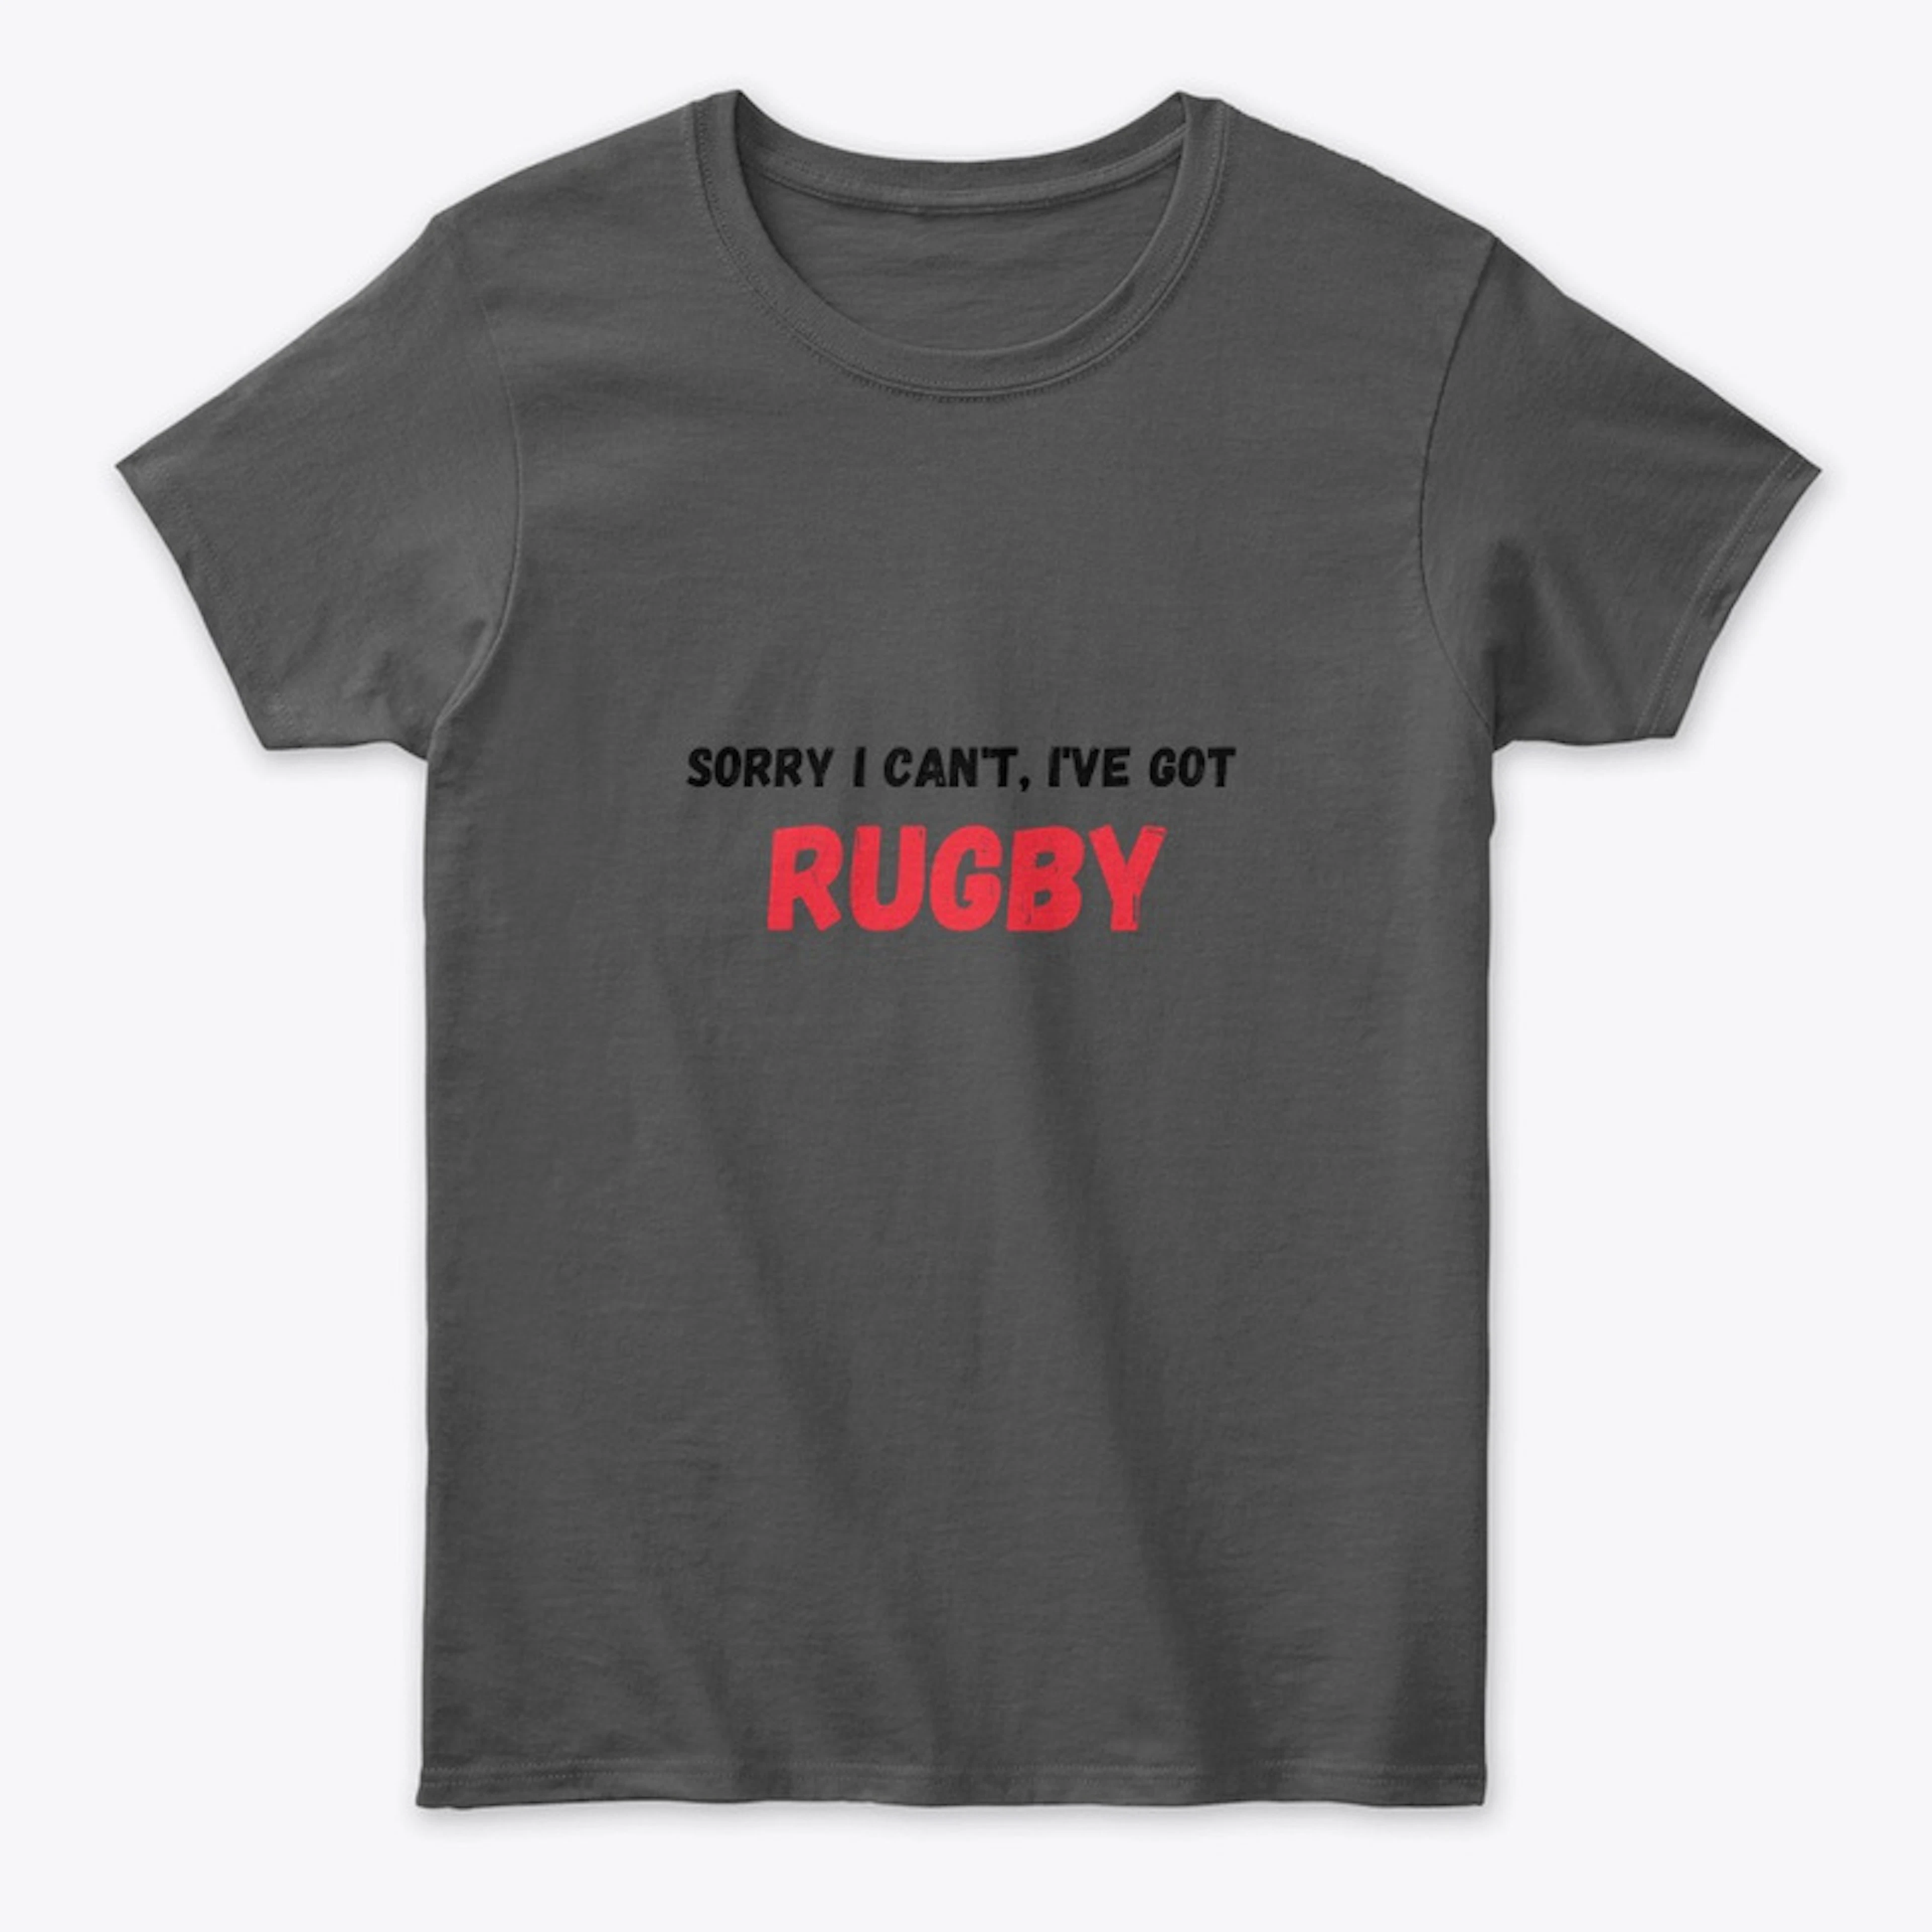 Sorry I can't, I've got Rugby